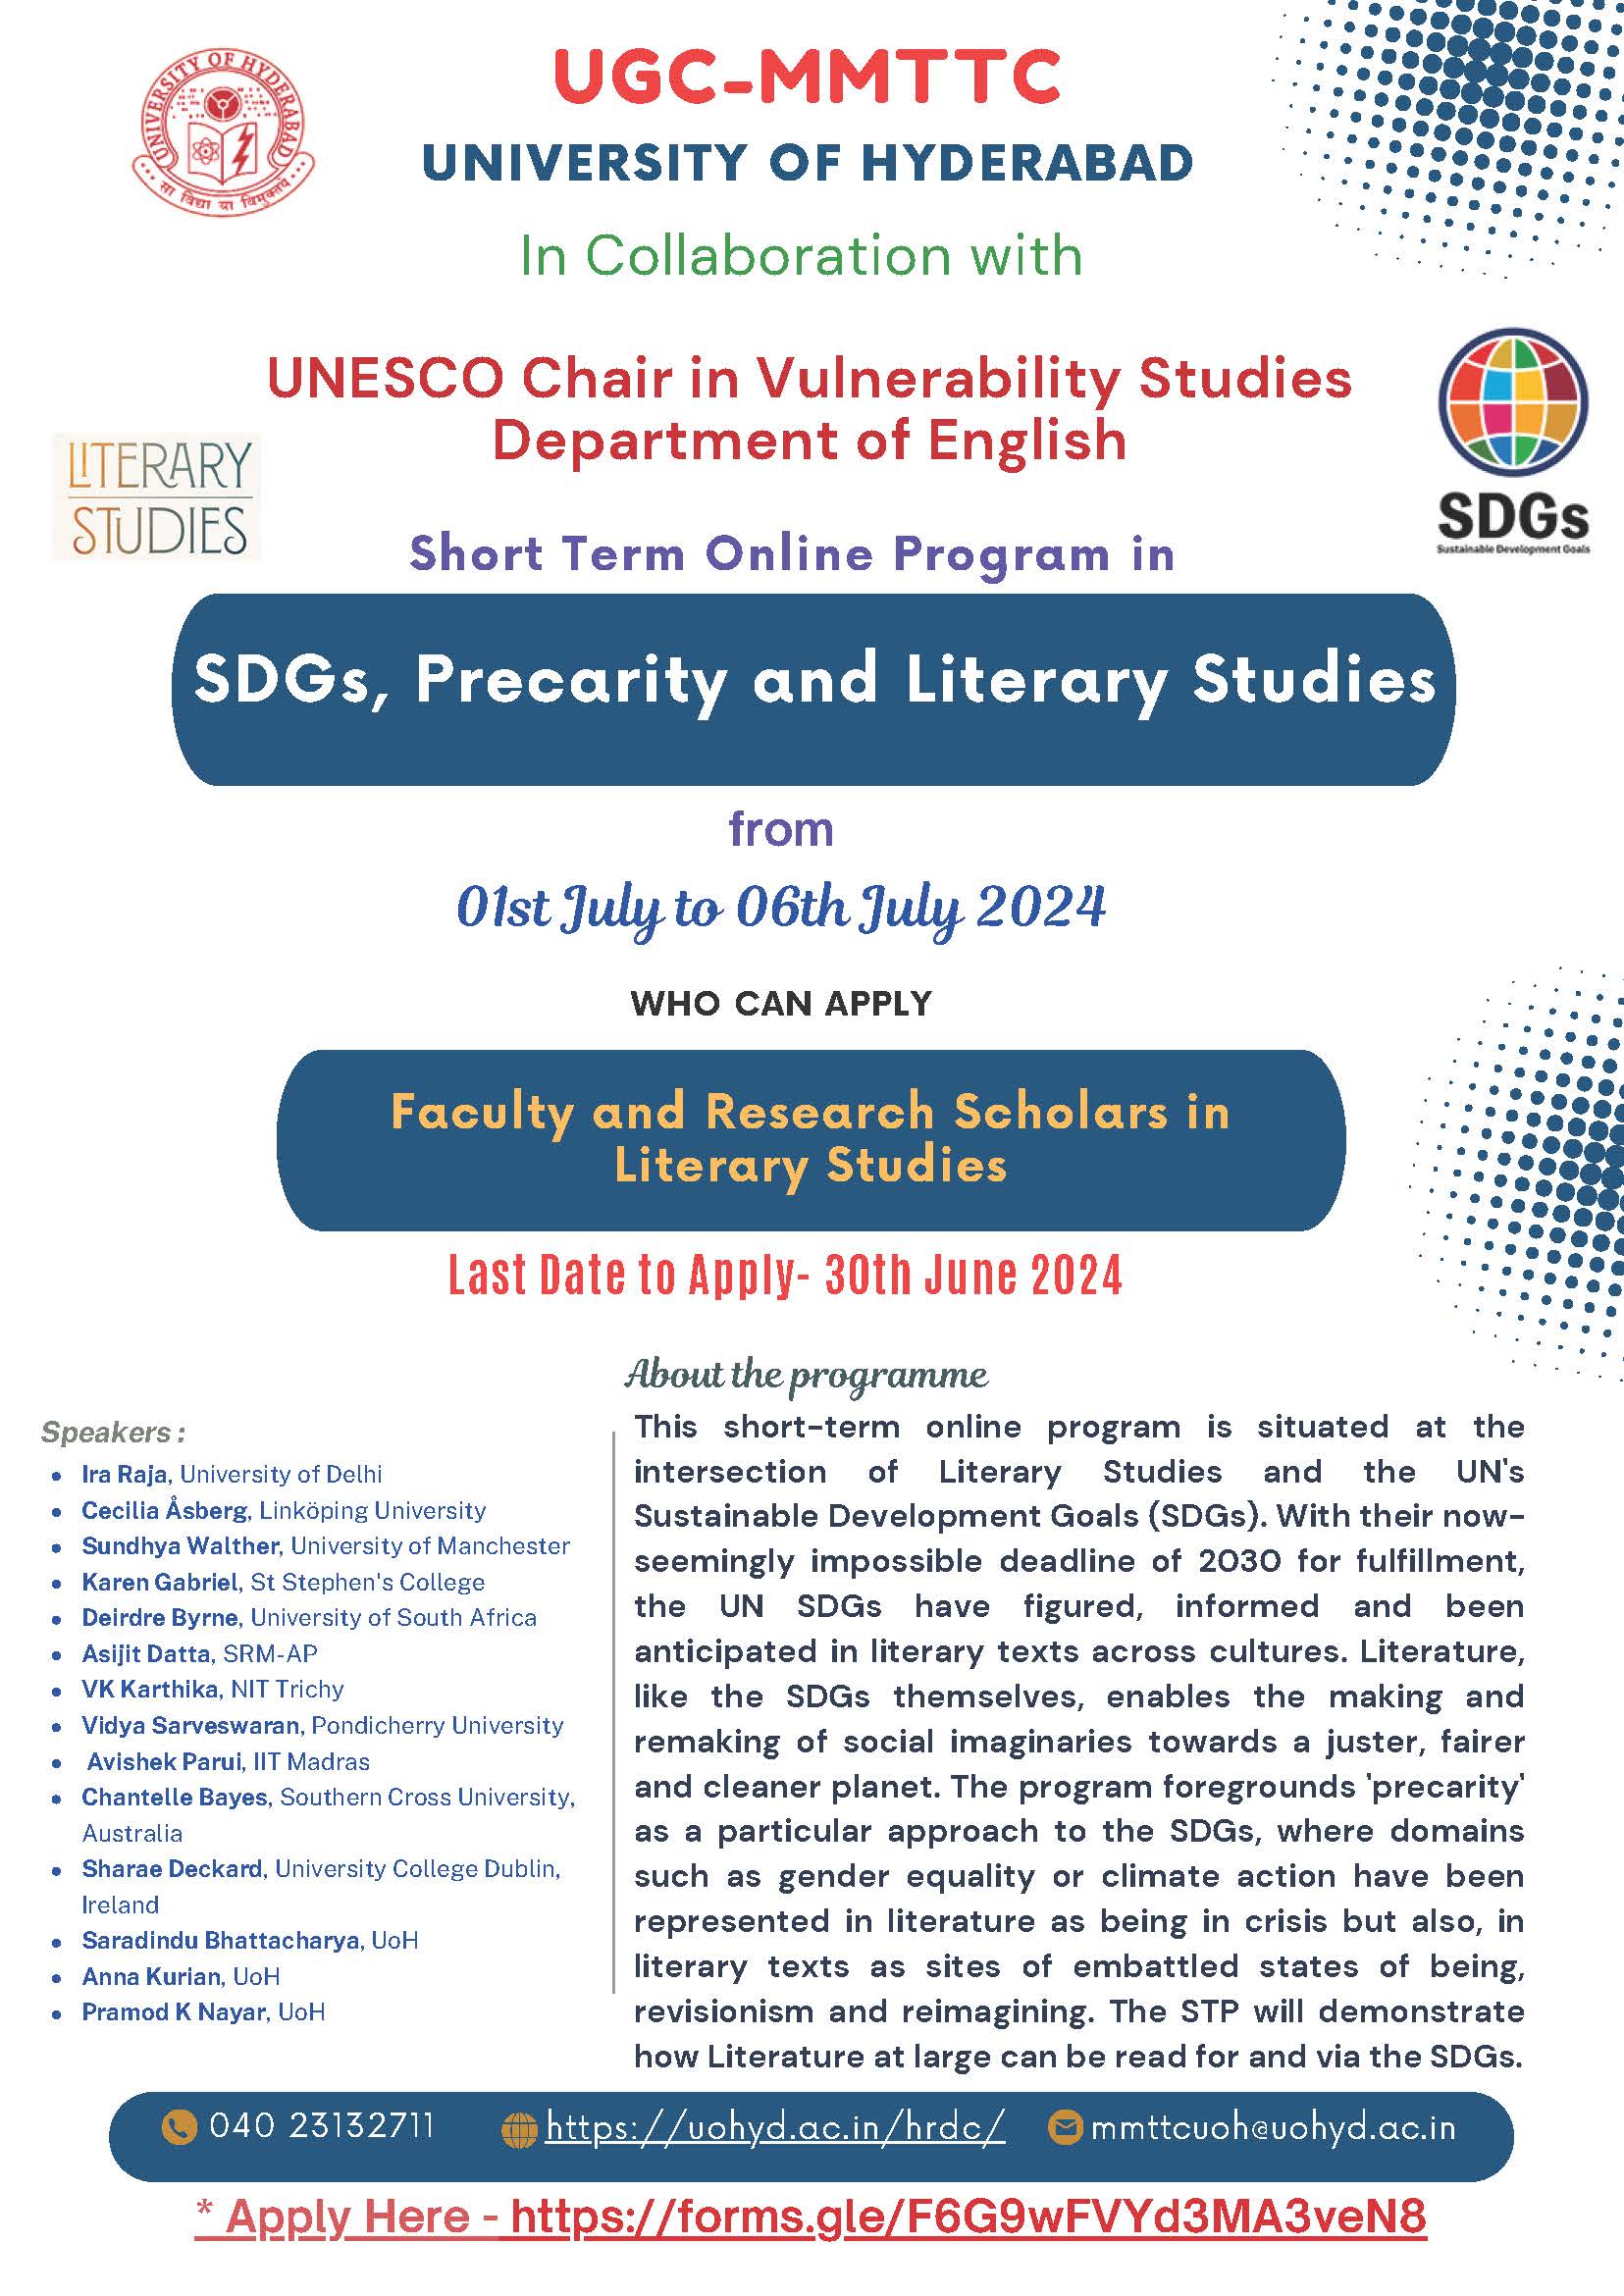 Call for participants! Information on the July event of UNESCO Chair in Vulnerability Studies